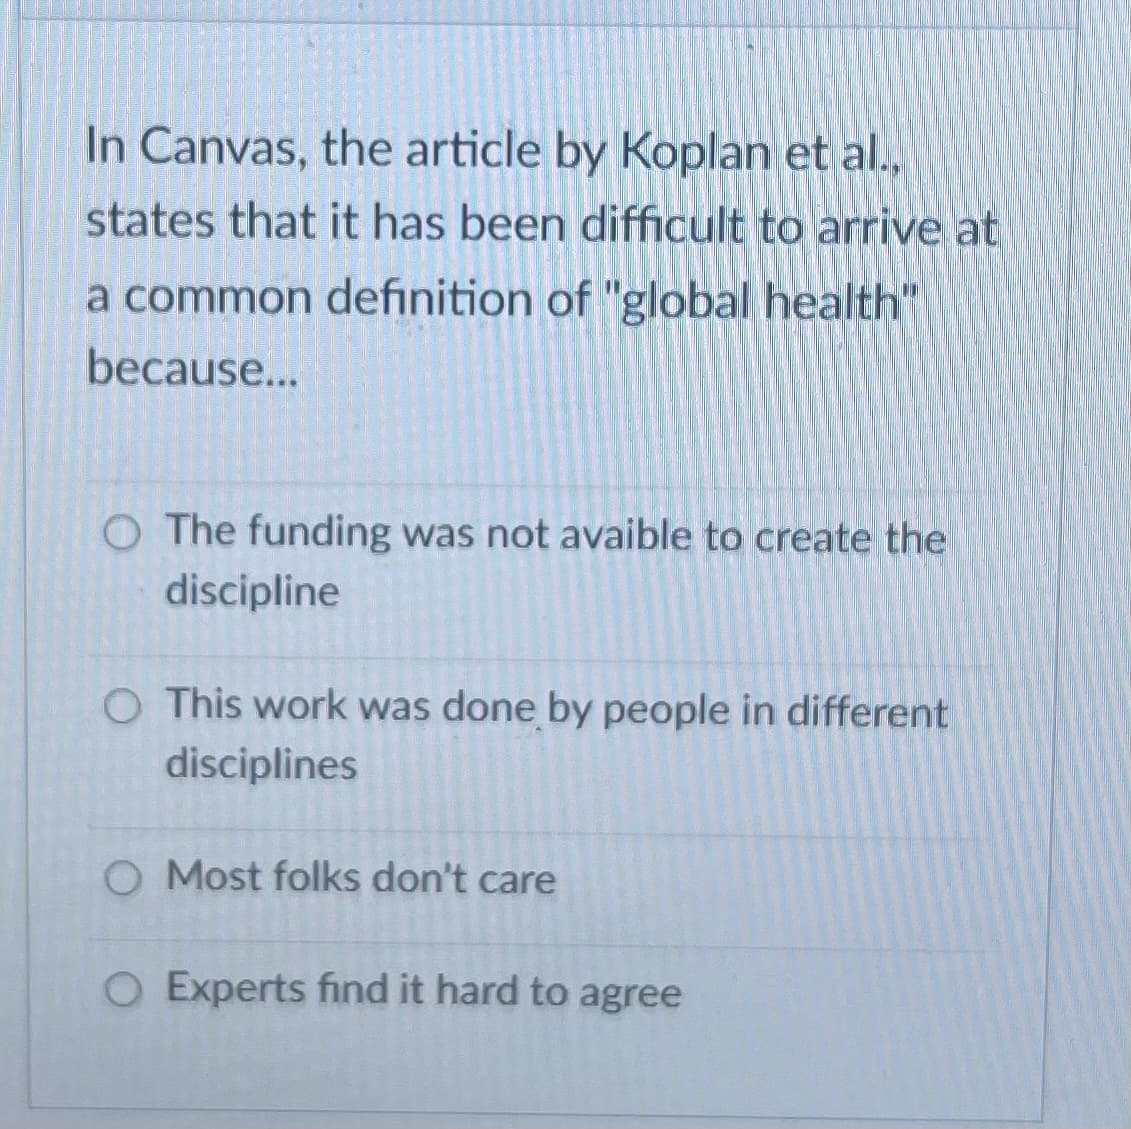 In Canvas, the article by Koplan et al.,
states that it has been difficult to arrive at
a common definition of "global health"
because...
O The funding was not avaible to create the
discipline
O This work was done by people in different
disciplines
O Most folks don't care
O Experts find it hard to agree